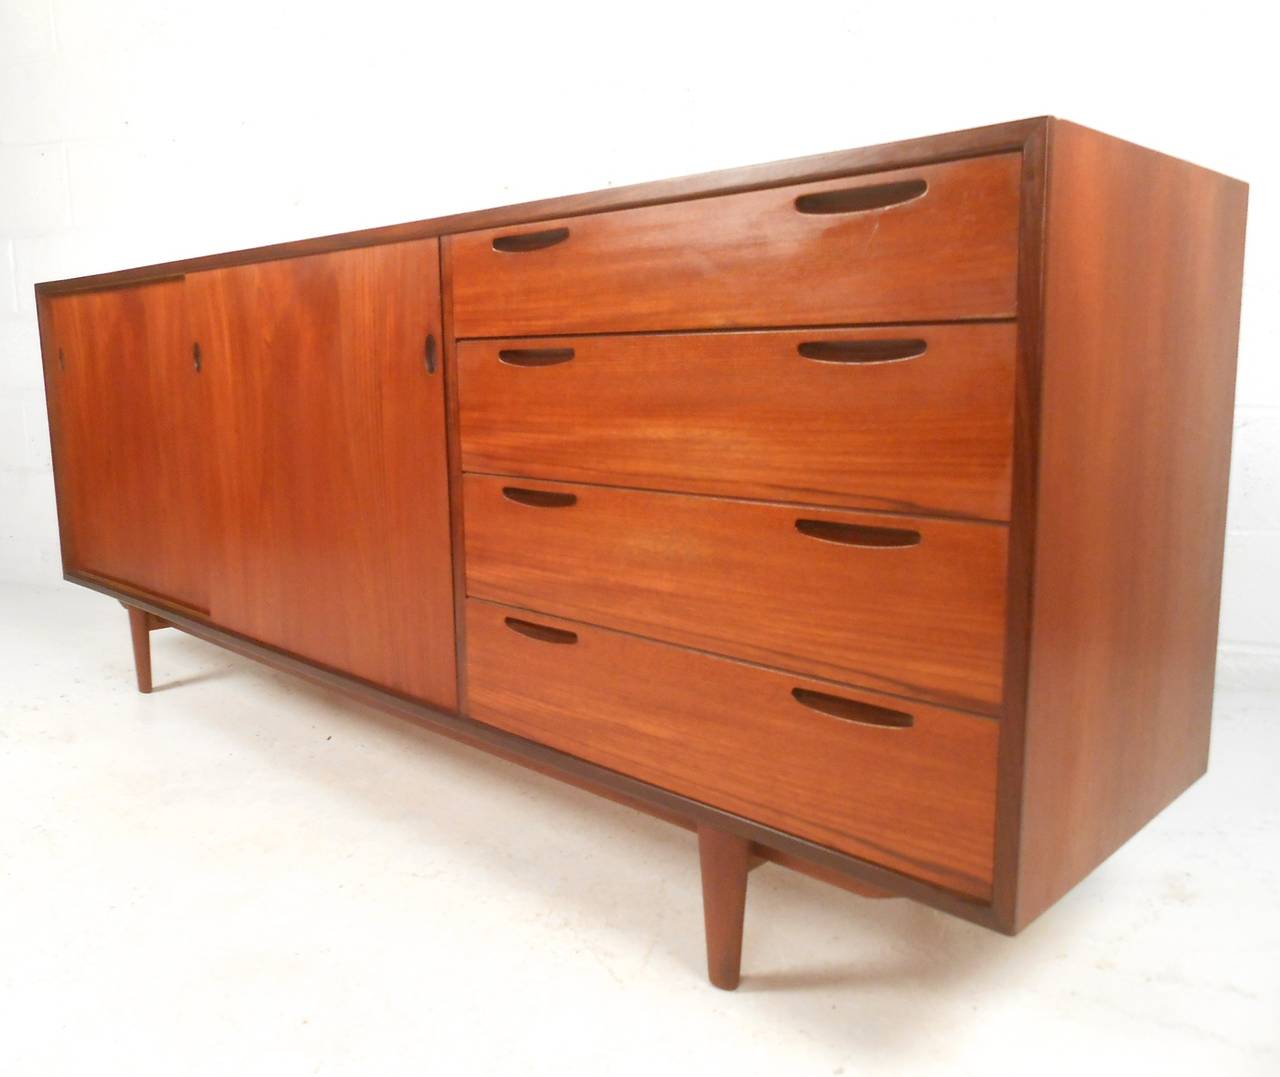 This beautifully crafted mid-century teak credenza is stylish and practical, combining vintage design with natural teak finish to create a truly wonderful addition to any room. Unique drawer pulls, tapered legs, and finished back add to the